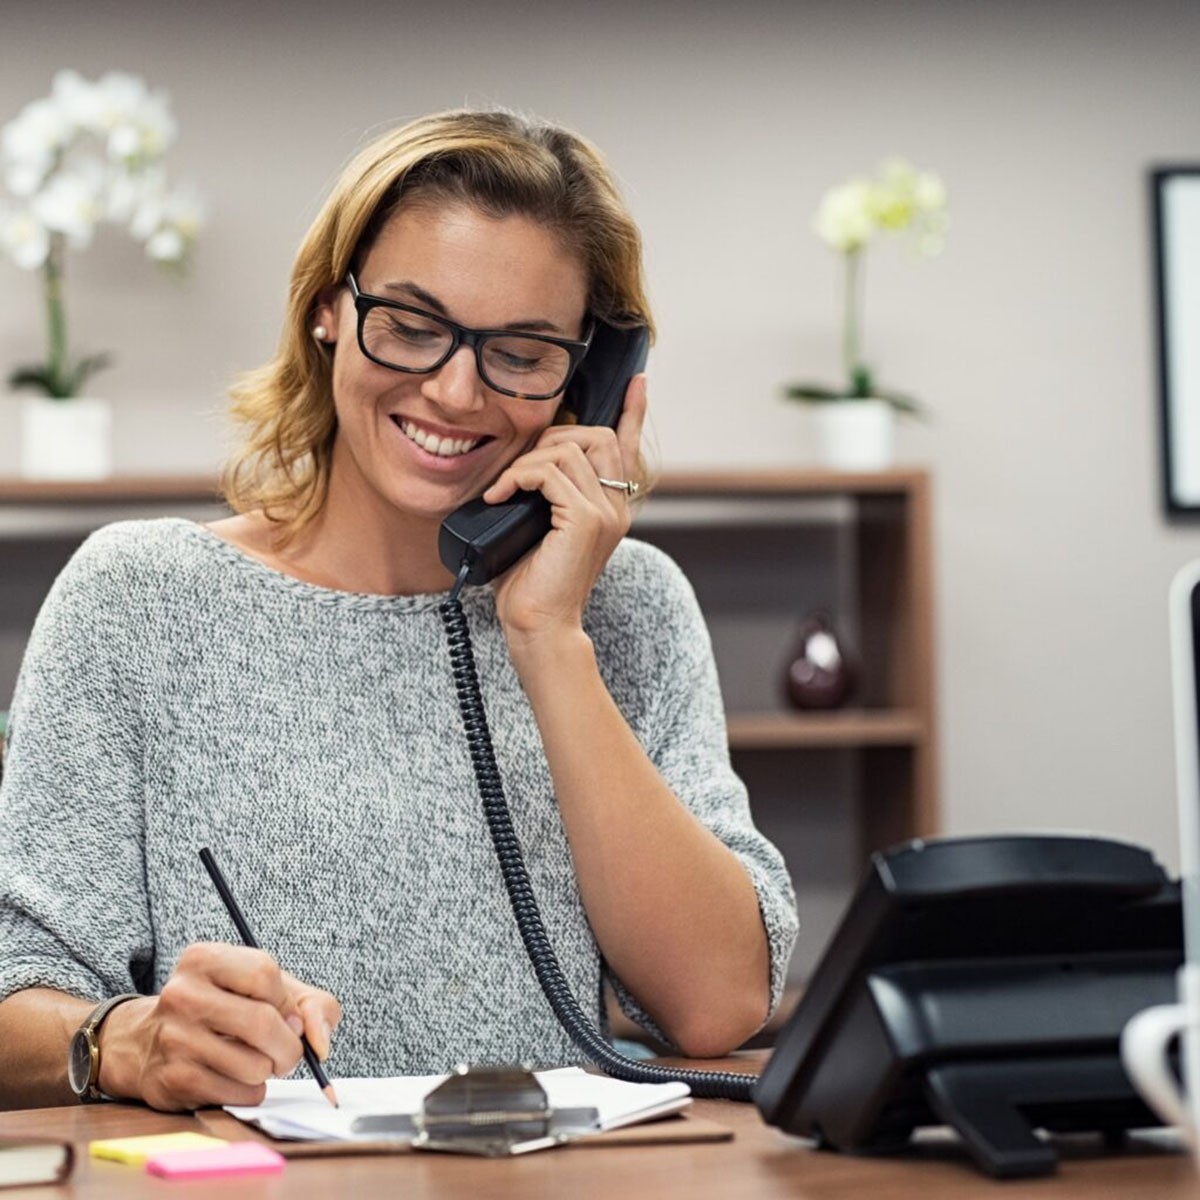 How To Set Up A Small Business Phone System